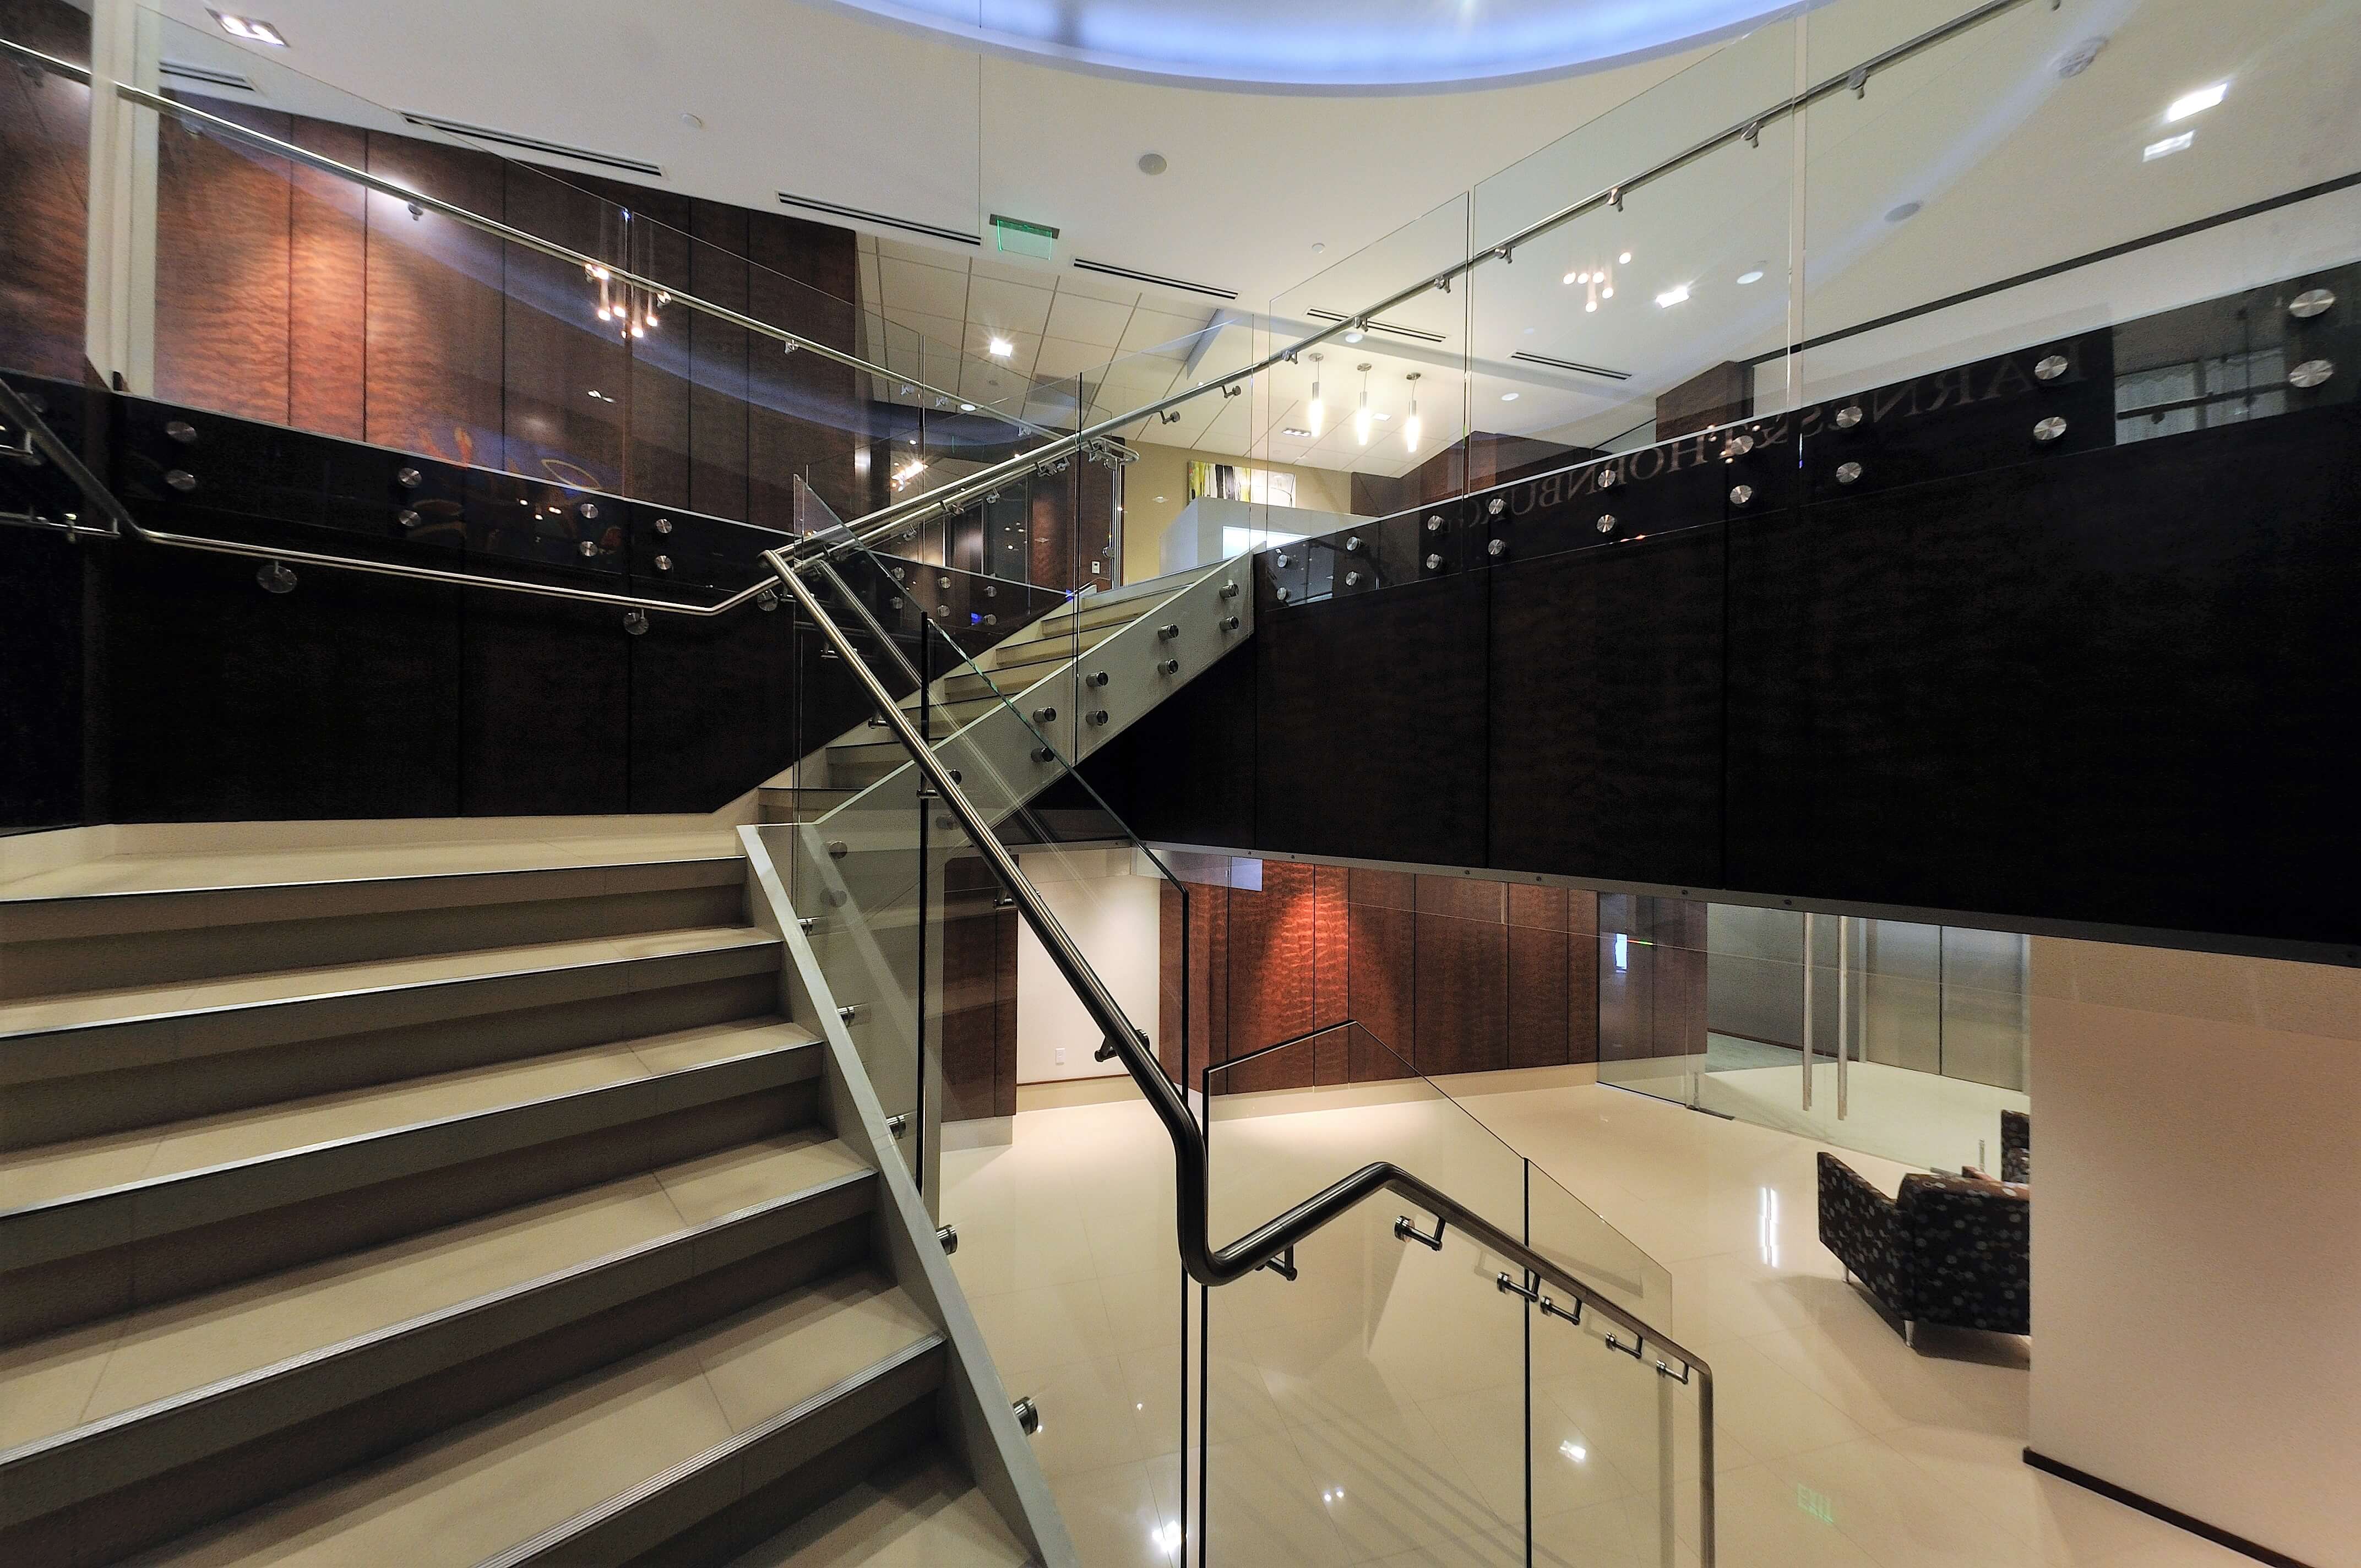 Upward lobby view of Barnes and Thornberg law offices, CA, Optik guardrail with clear glass